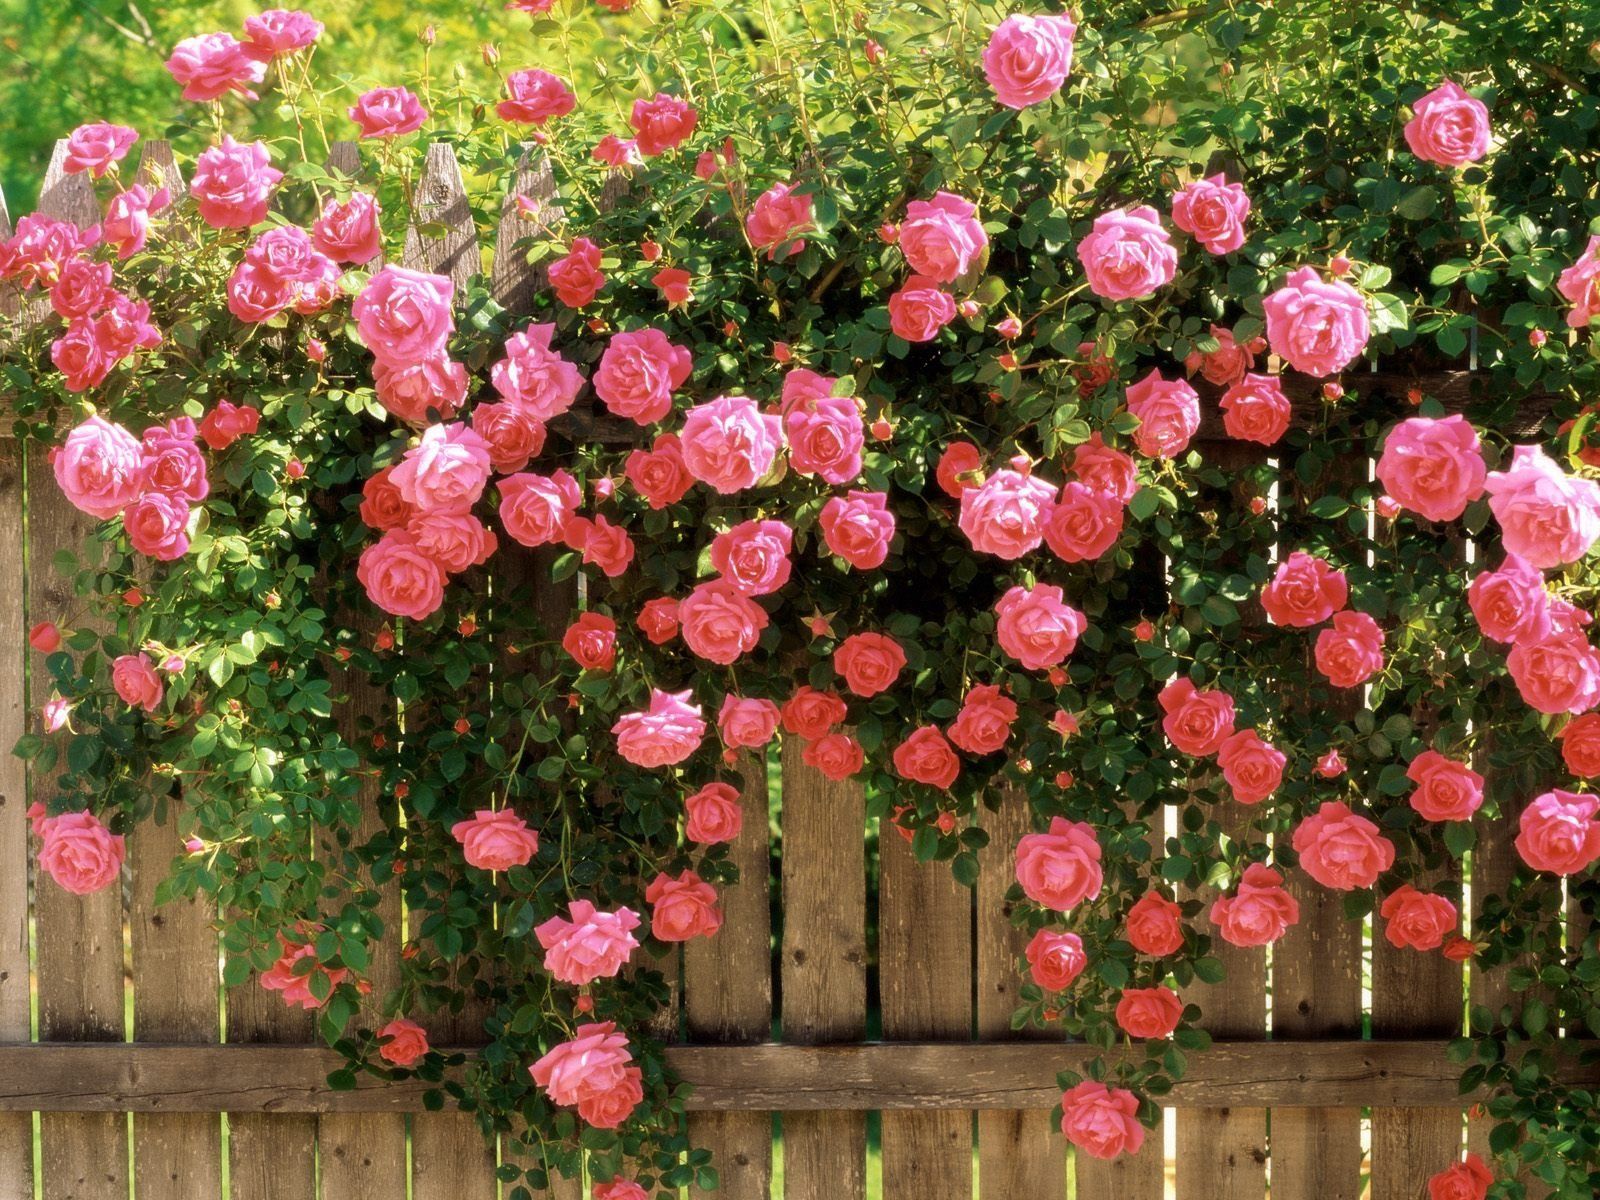 roses, flowers, greens, fence iphone wallpaper